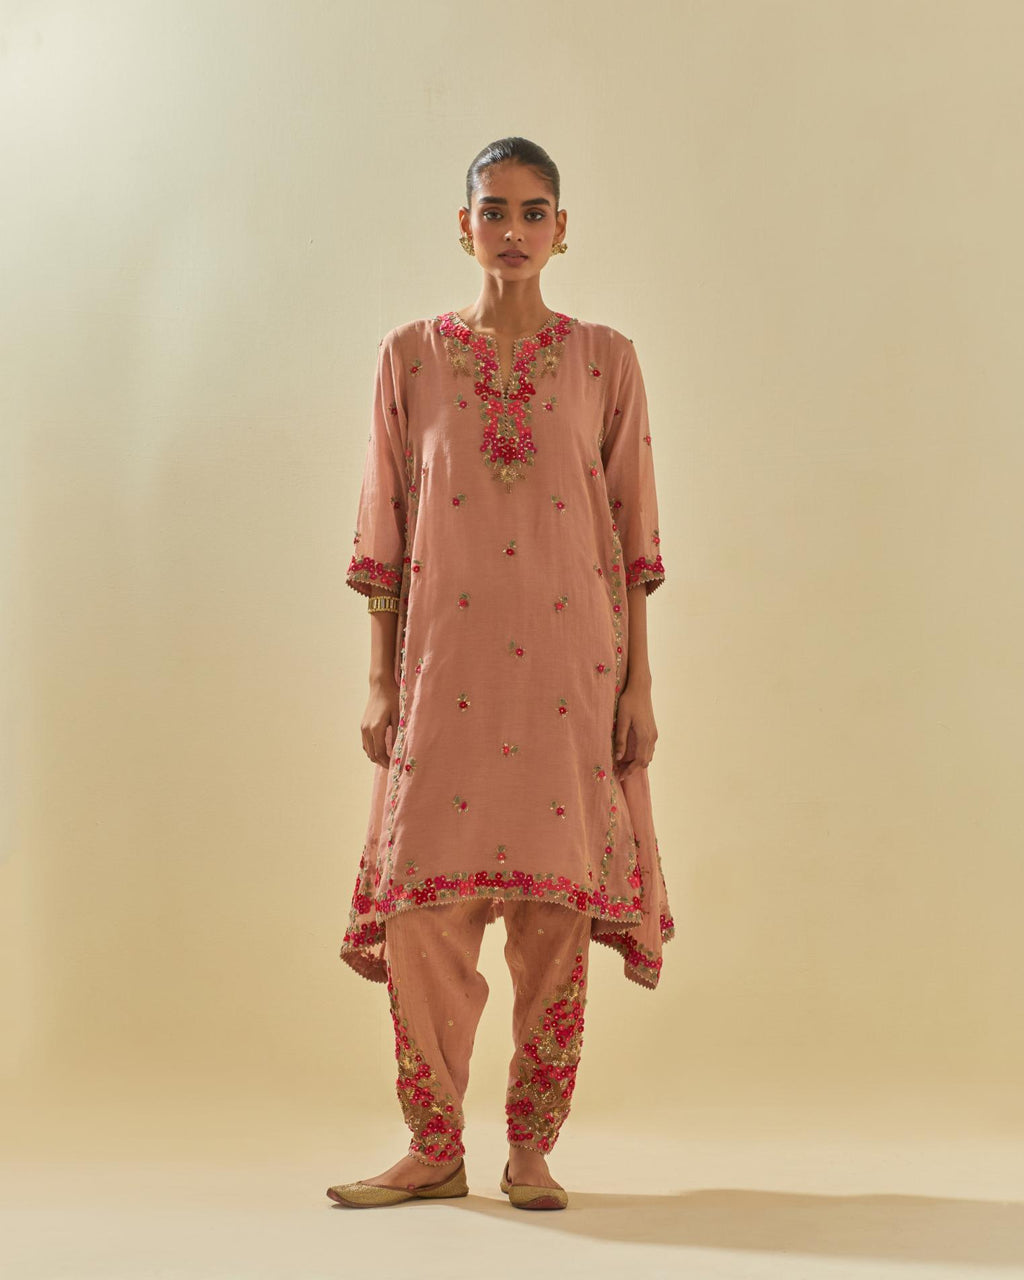 Pink tissue chanderi mid length kalidar kurta set with hand cut silk flower embroidery, highlighted with gold sequins.